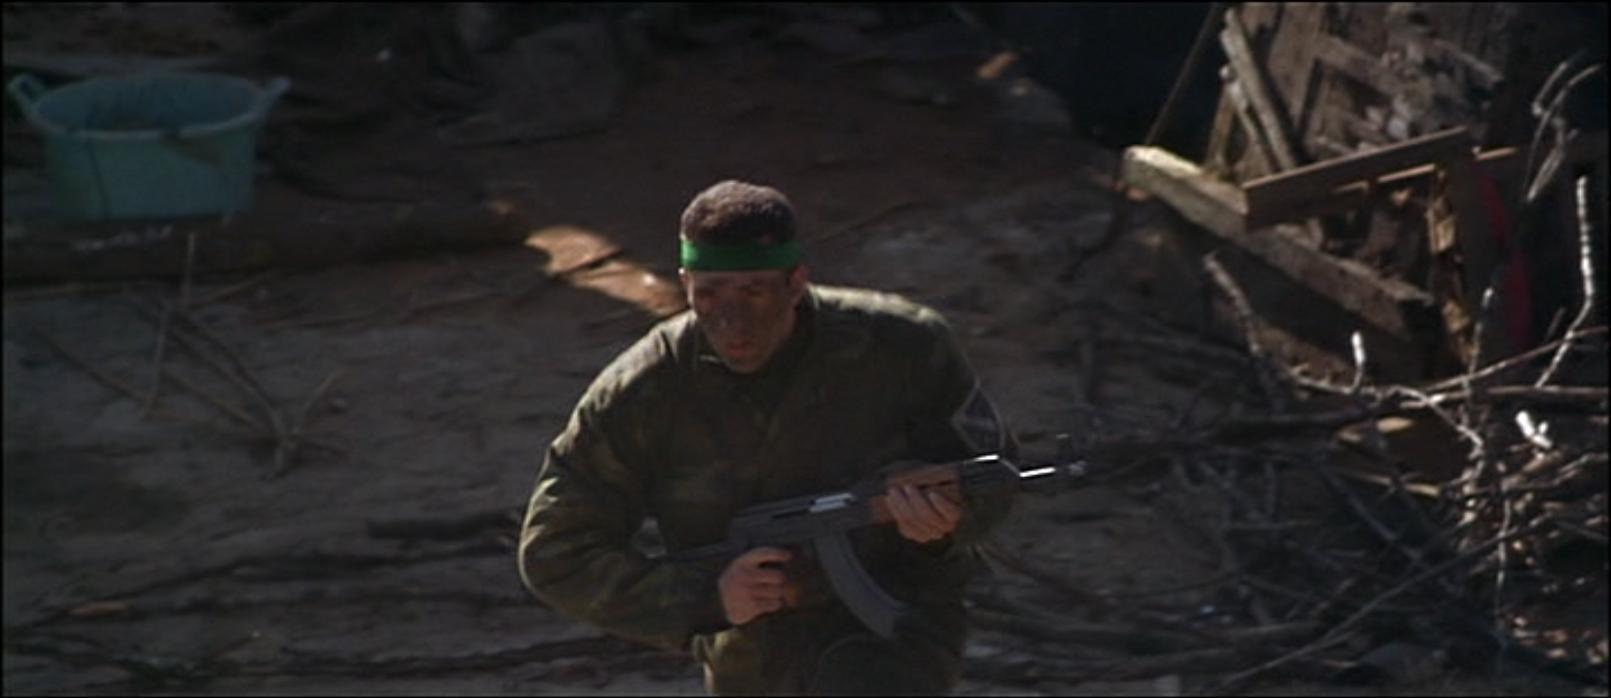 A Bosnian Soldier rushes with a Zastava M70AB2 before being killed by Guy.